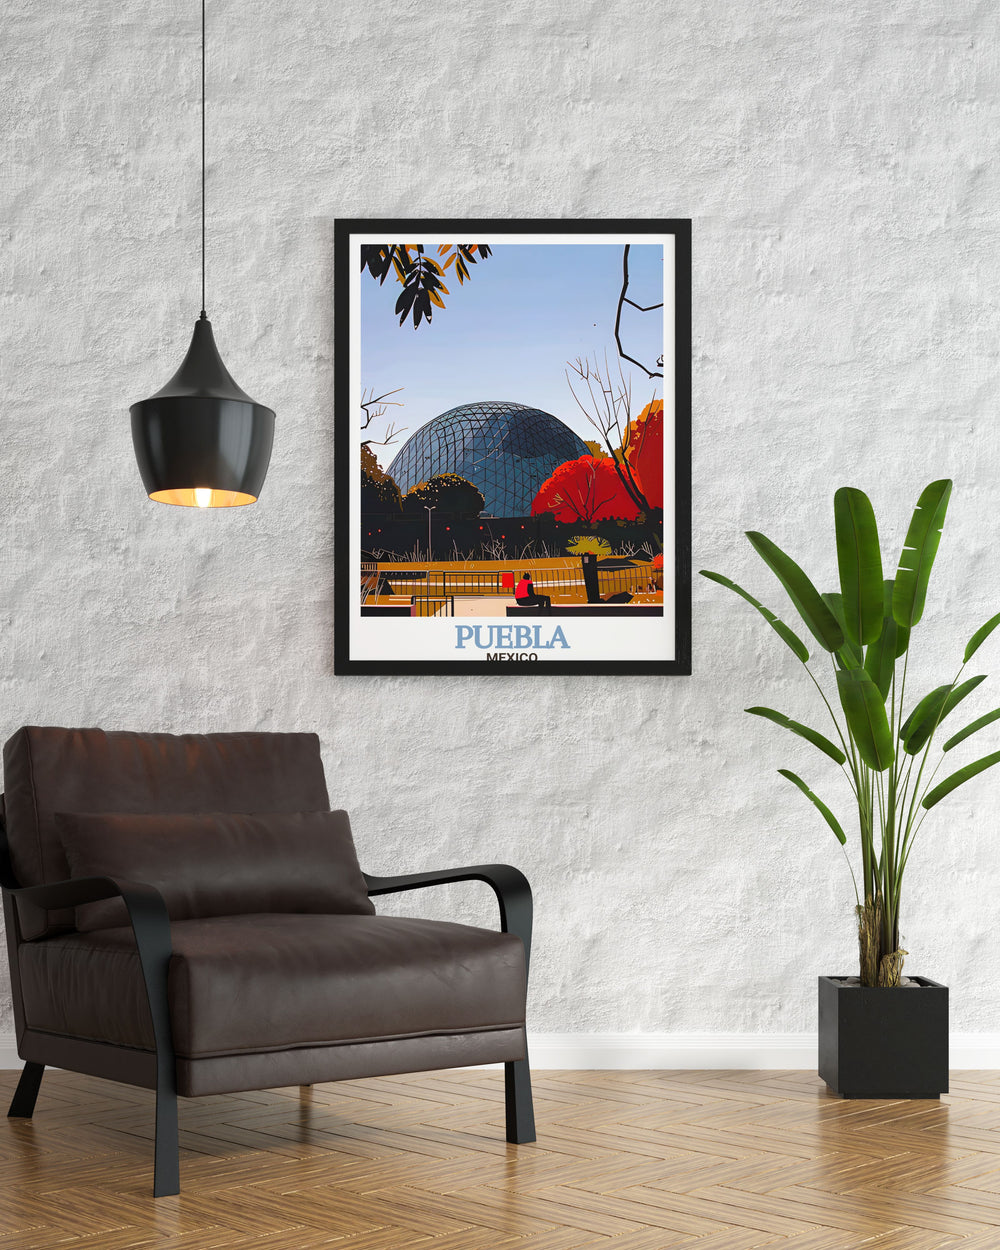 Detailed Puebla Poster highlighting the rich culture and history of Mexico Parque Ecologico Revolucion Mexicana framed prints offering stunning visuals of lush landscapes perfect for travel enthusiasts and lovers of contemporary art and nature